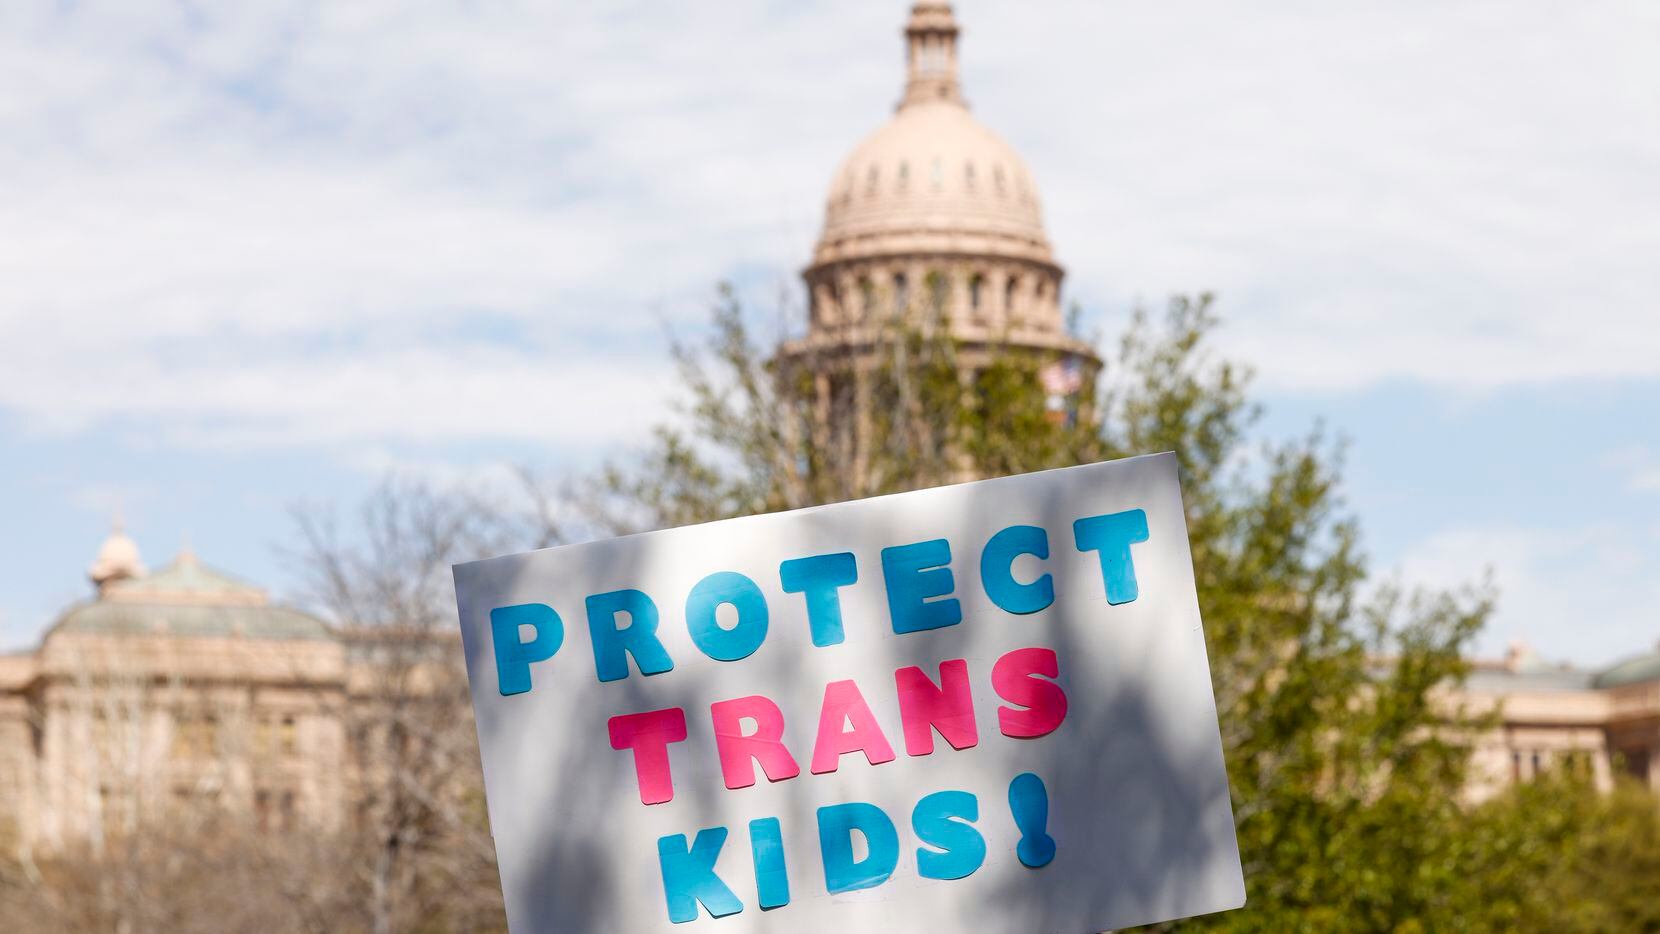 An attendee raises a “Protect Trans Kids” sign in front of the Texas State Capitol during...